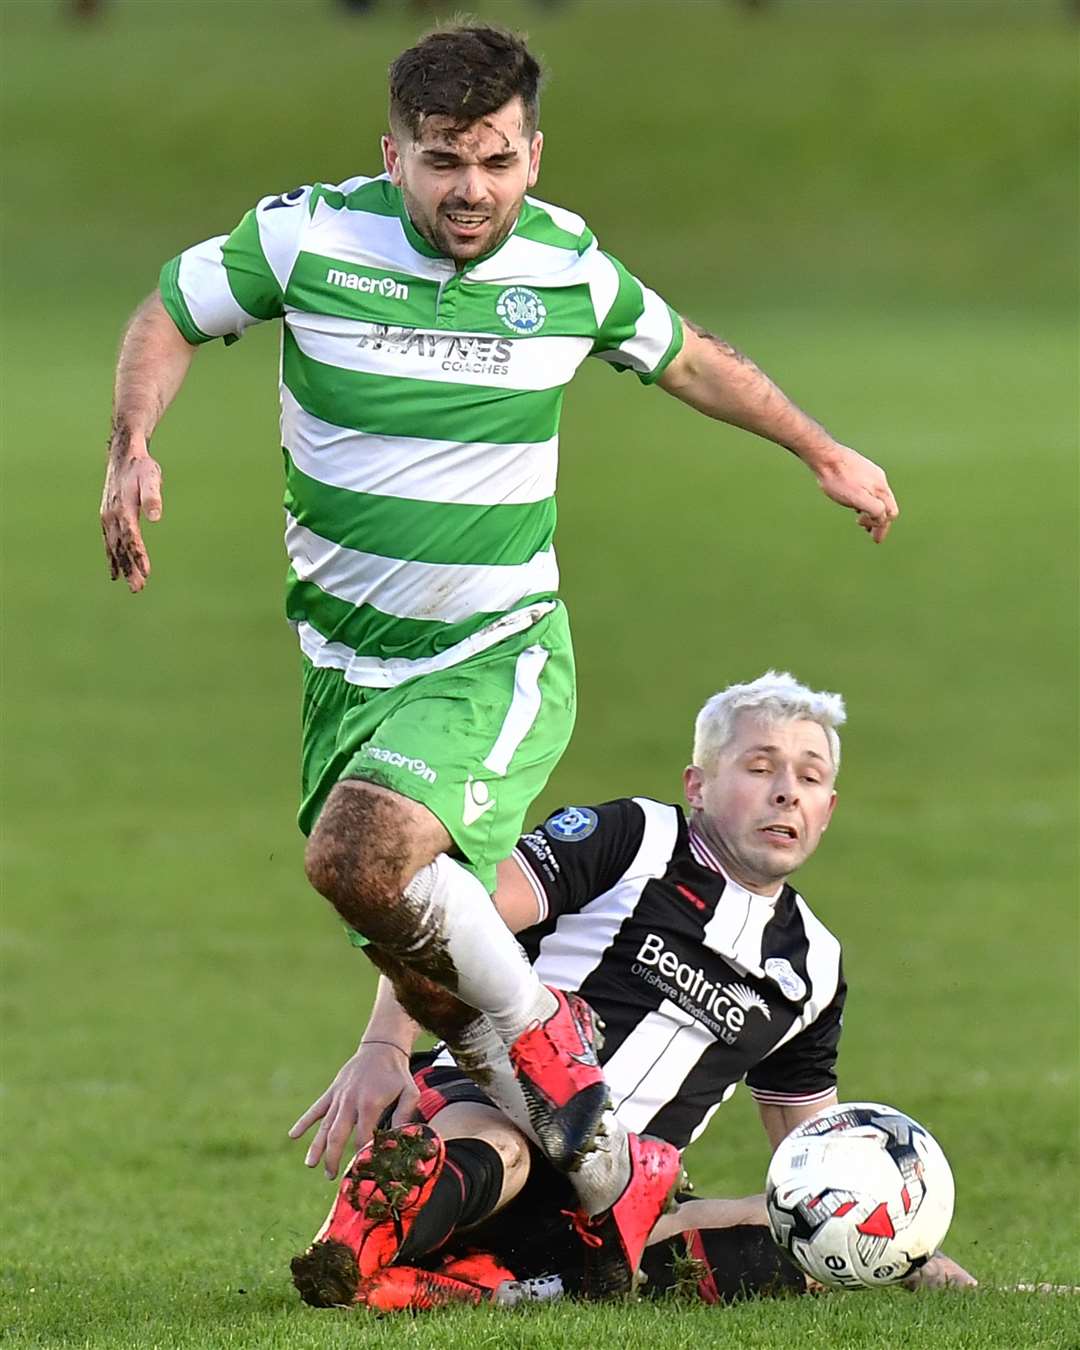 Jack Henry at full stretch to tackle Buckie's Andy MacAskill at Harmsworth Park last Saturday. Manager Gary Manson described Henry as 'your typical all-round box-to-box midfielder'. Picture: Mel Roger